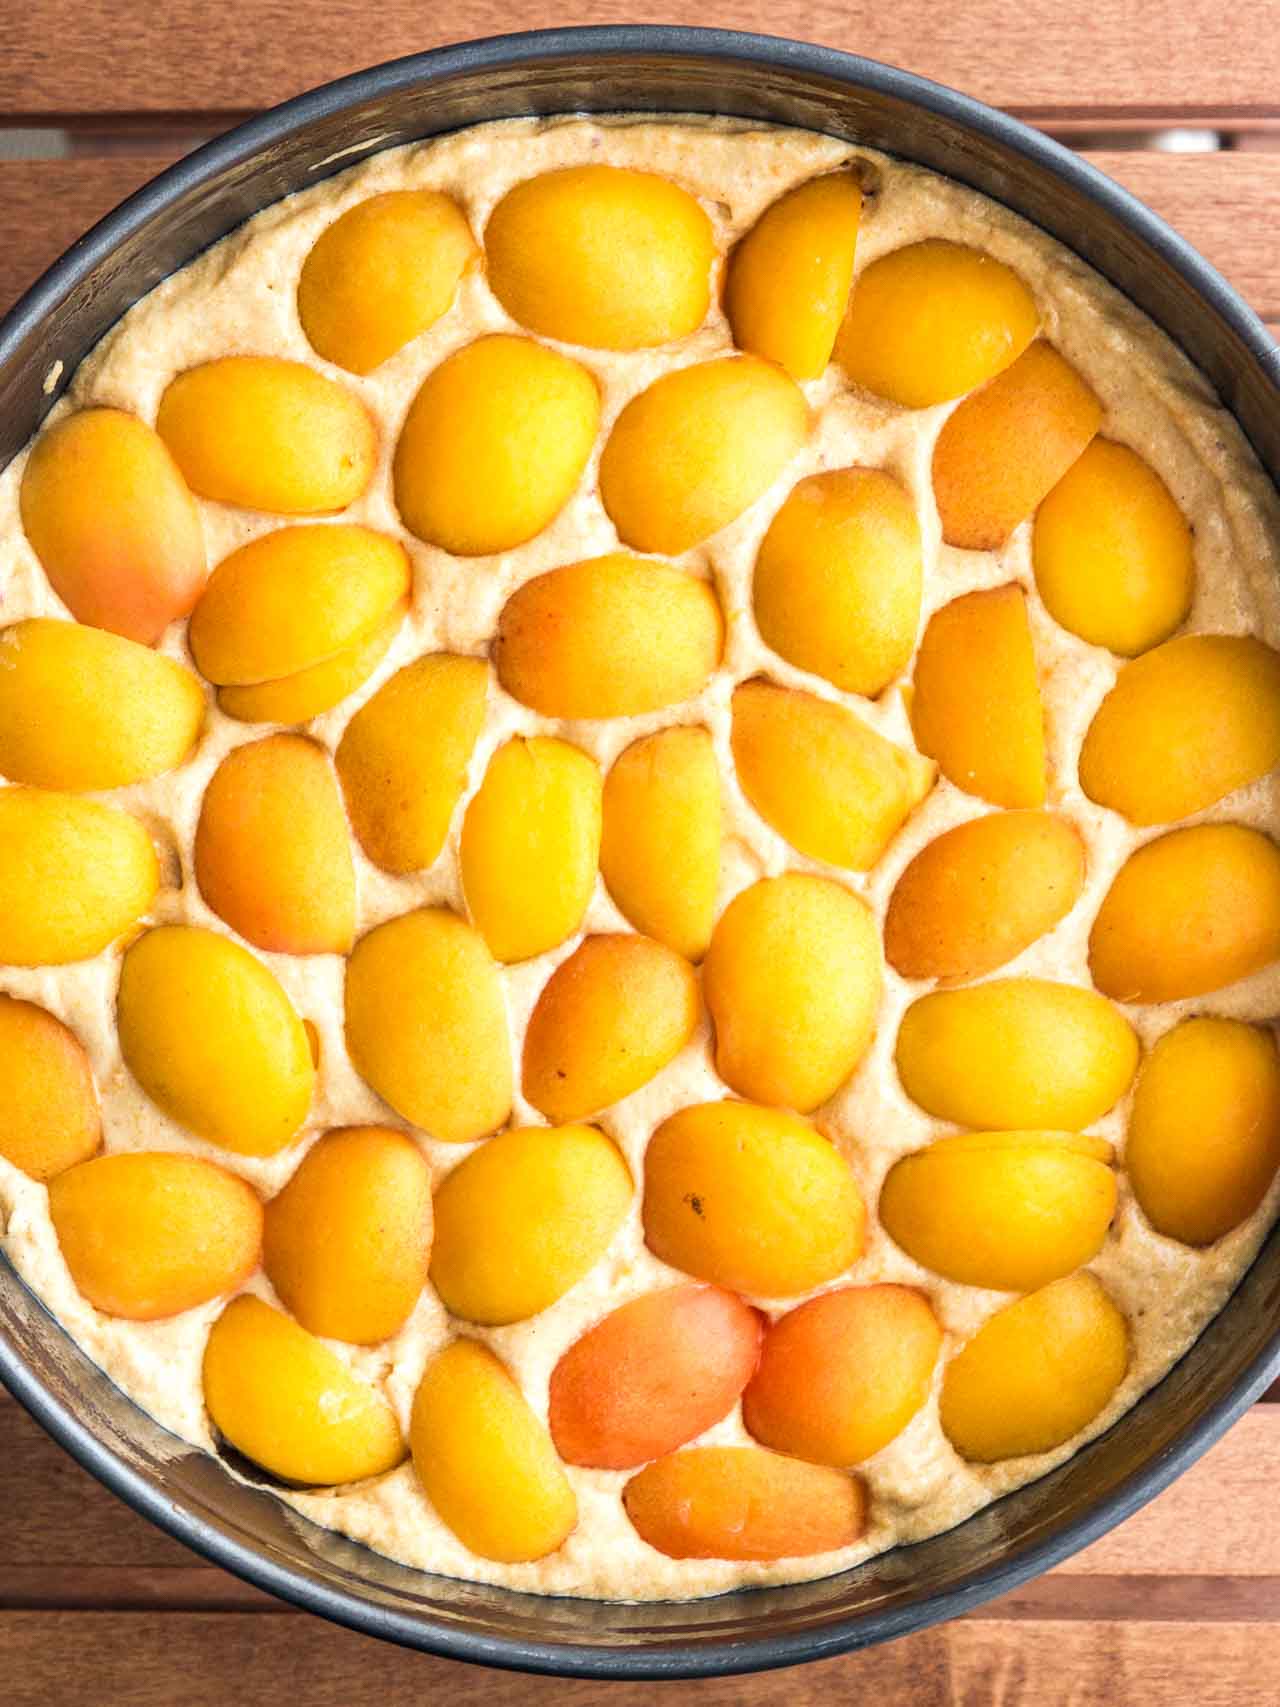 Apricot Cake Recipe with Fresh Apricots | Plated Cravings